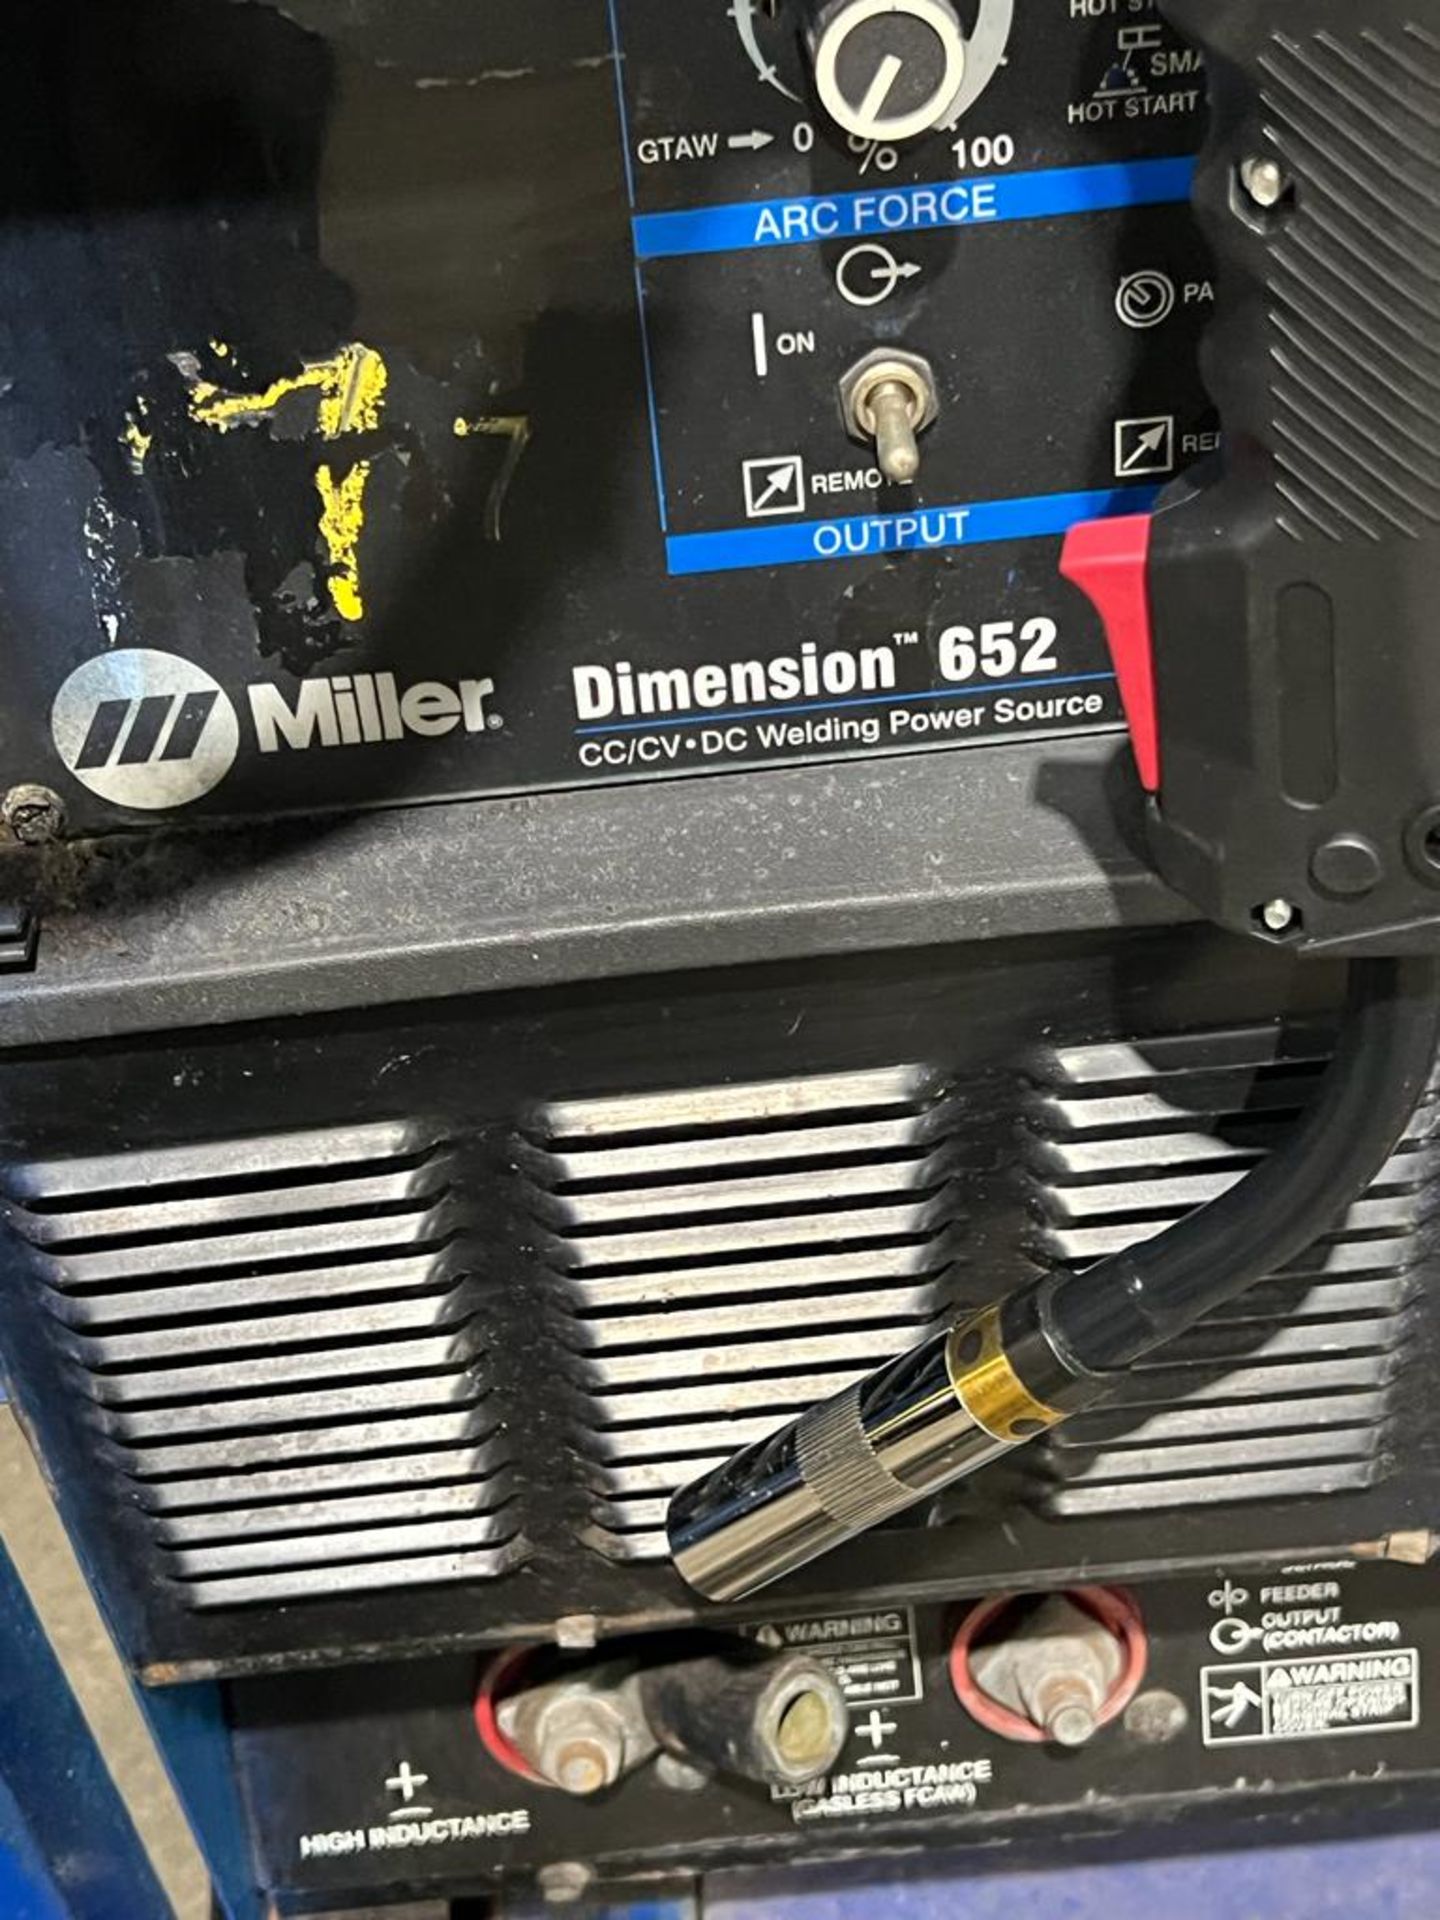 Miller Dimension 652 Mig Welder 650 Amp Mig Tig Stick Multi-Process Power Source with New Wire - Image 2 of 2